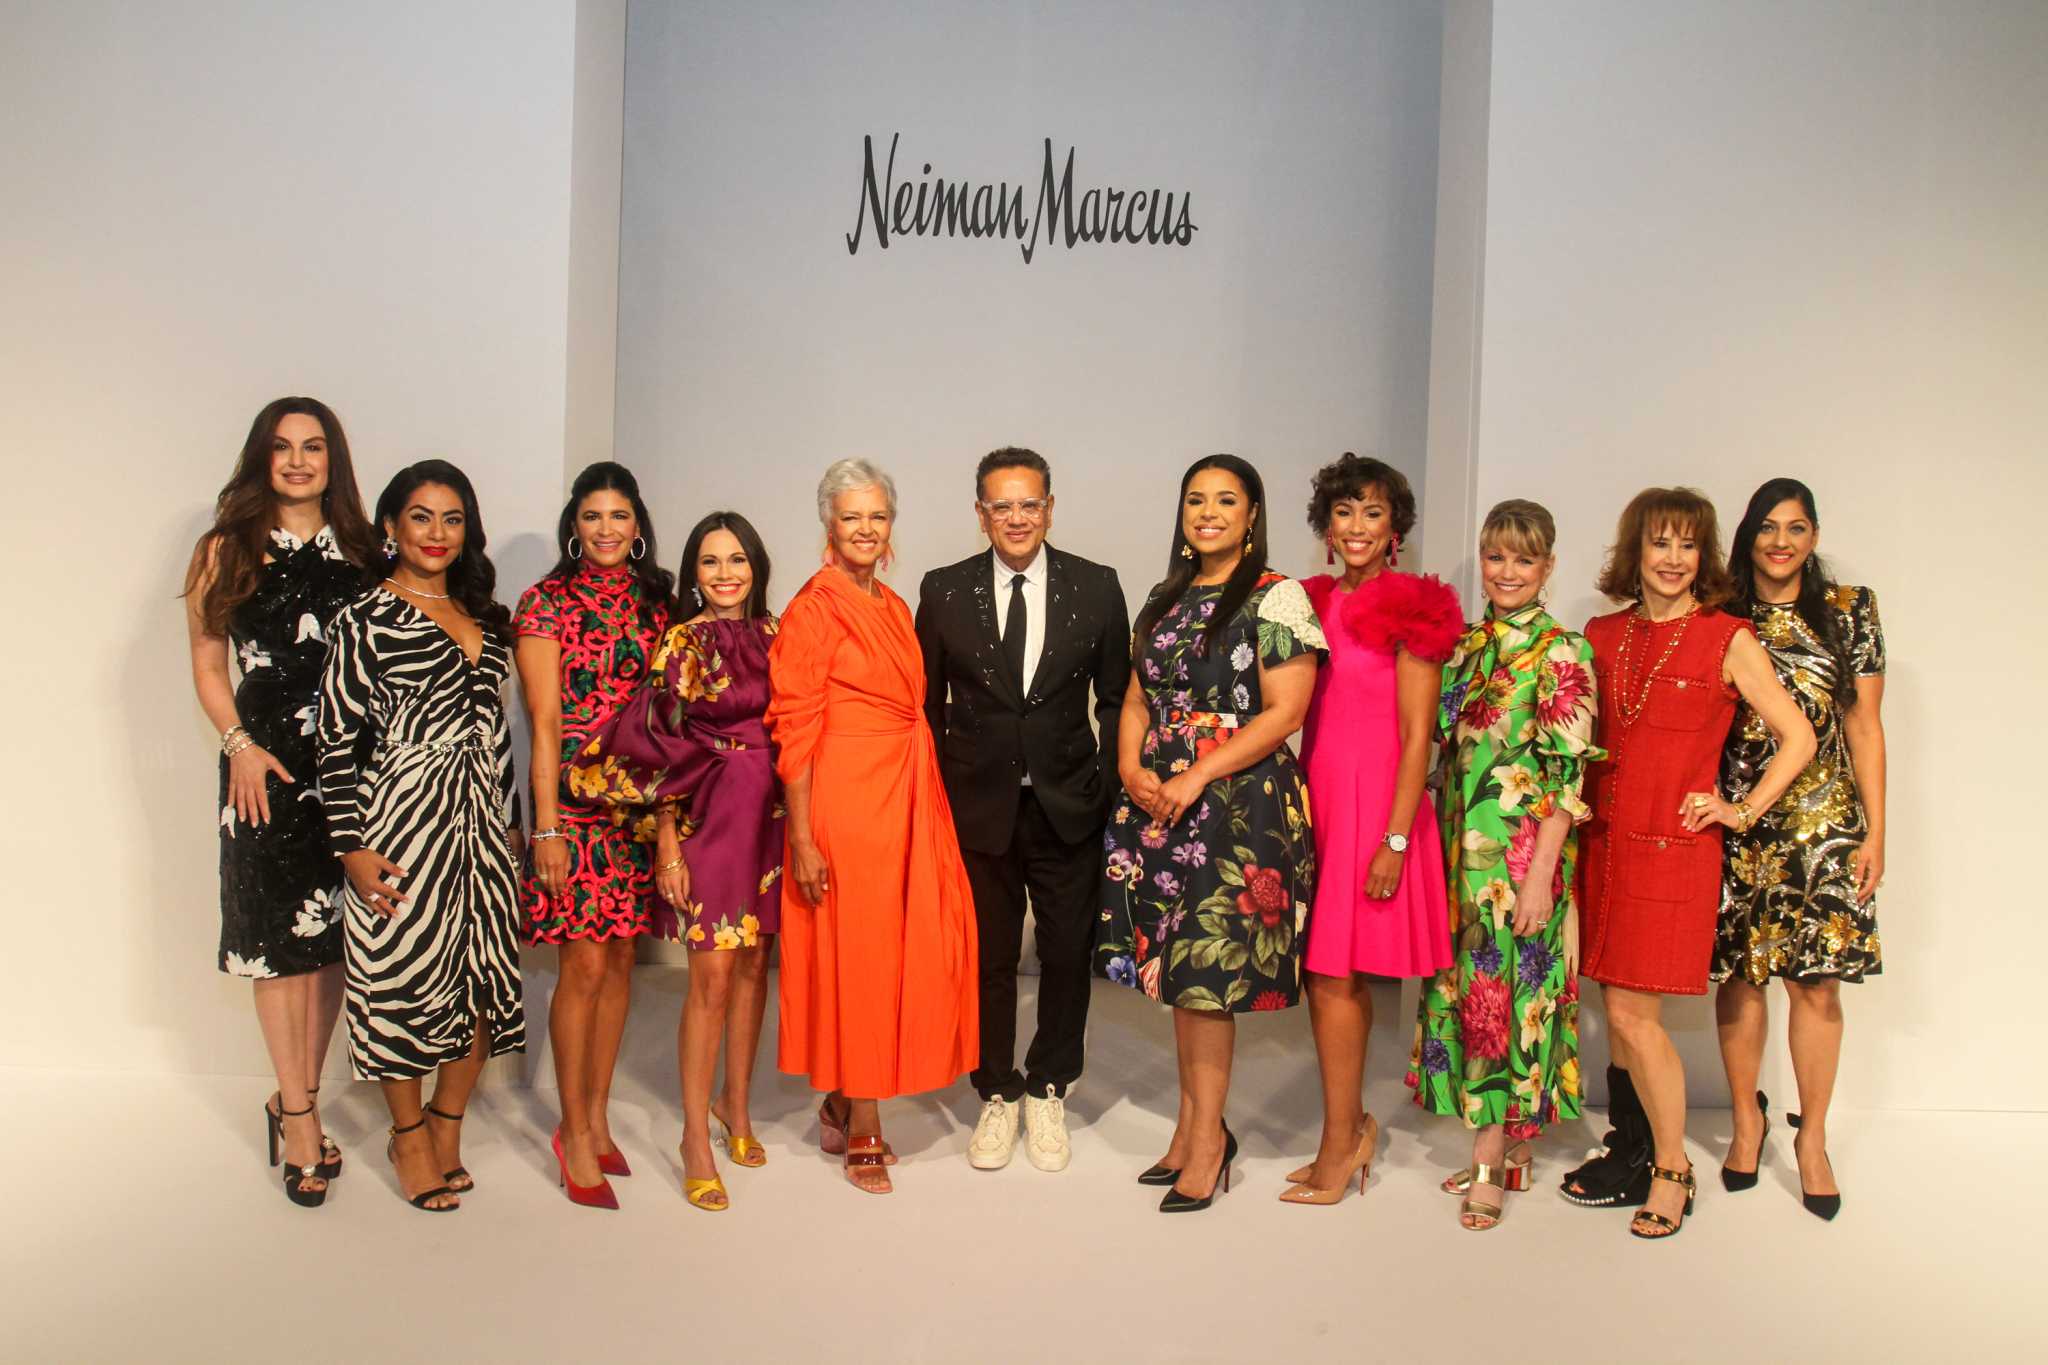 em>PaperCity</em> Best Dressed Honorees Revealed at Buzzing Neiman Marcus  Cocktail Party — See the Ladies Stepping Into the Spotlight